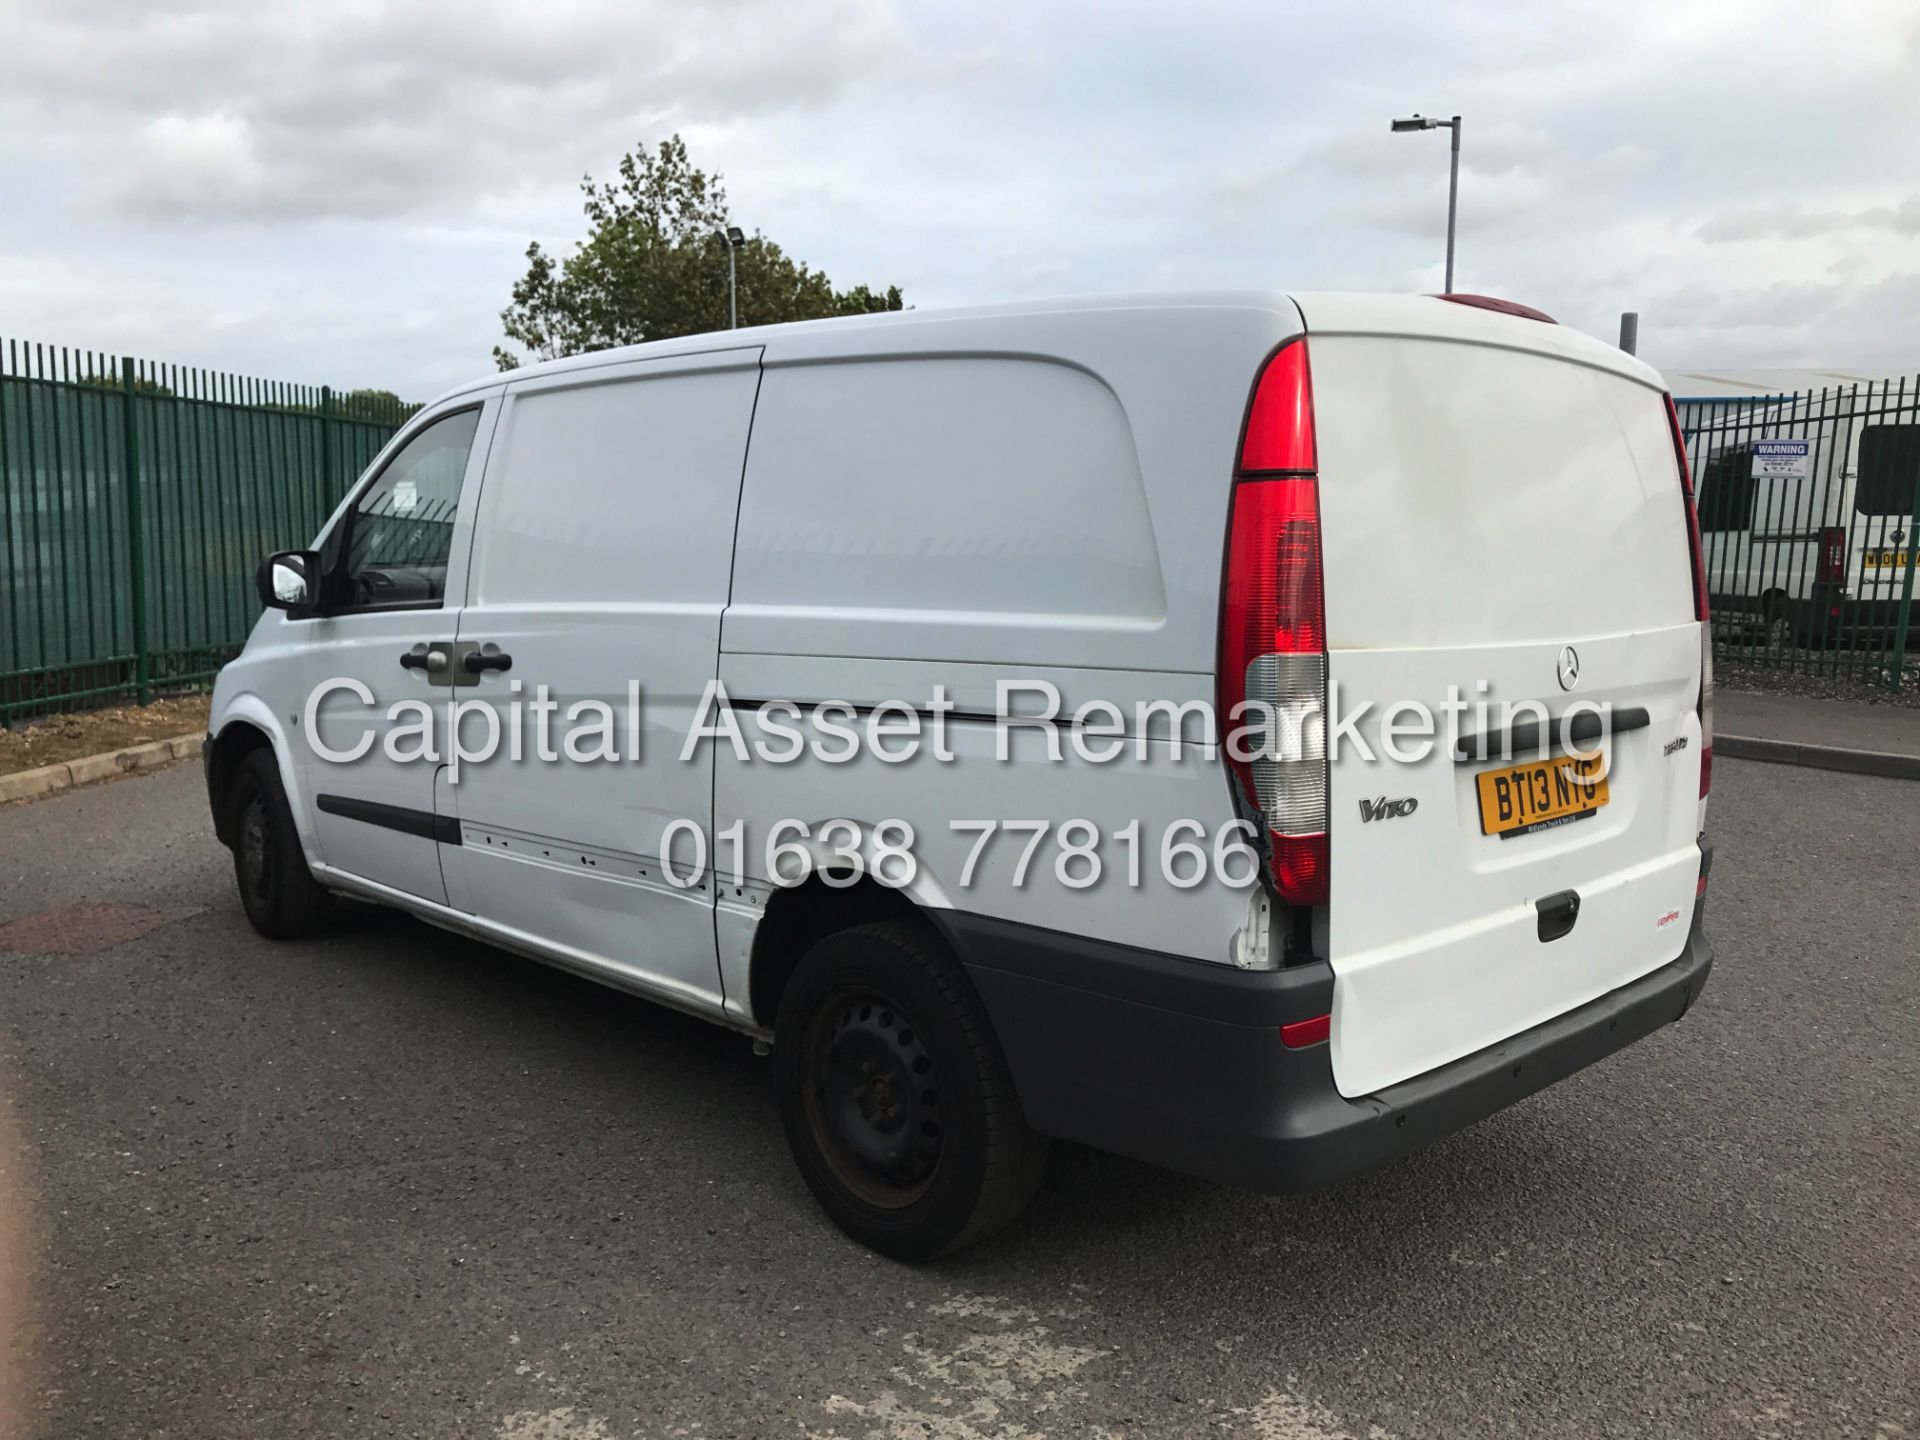 MERCEDES VITO 113CDI "136BHP - 6 SPEED" 13 REG NEW SHAPE - AIR CON - ELEC PACK - CRUISE - 1 OWNER - Image 4 of 13